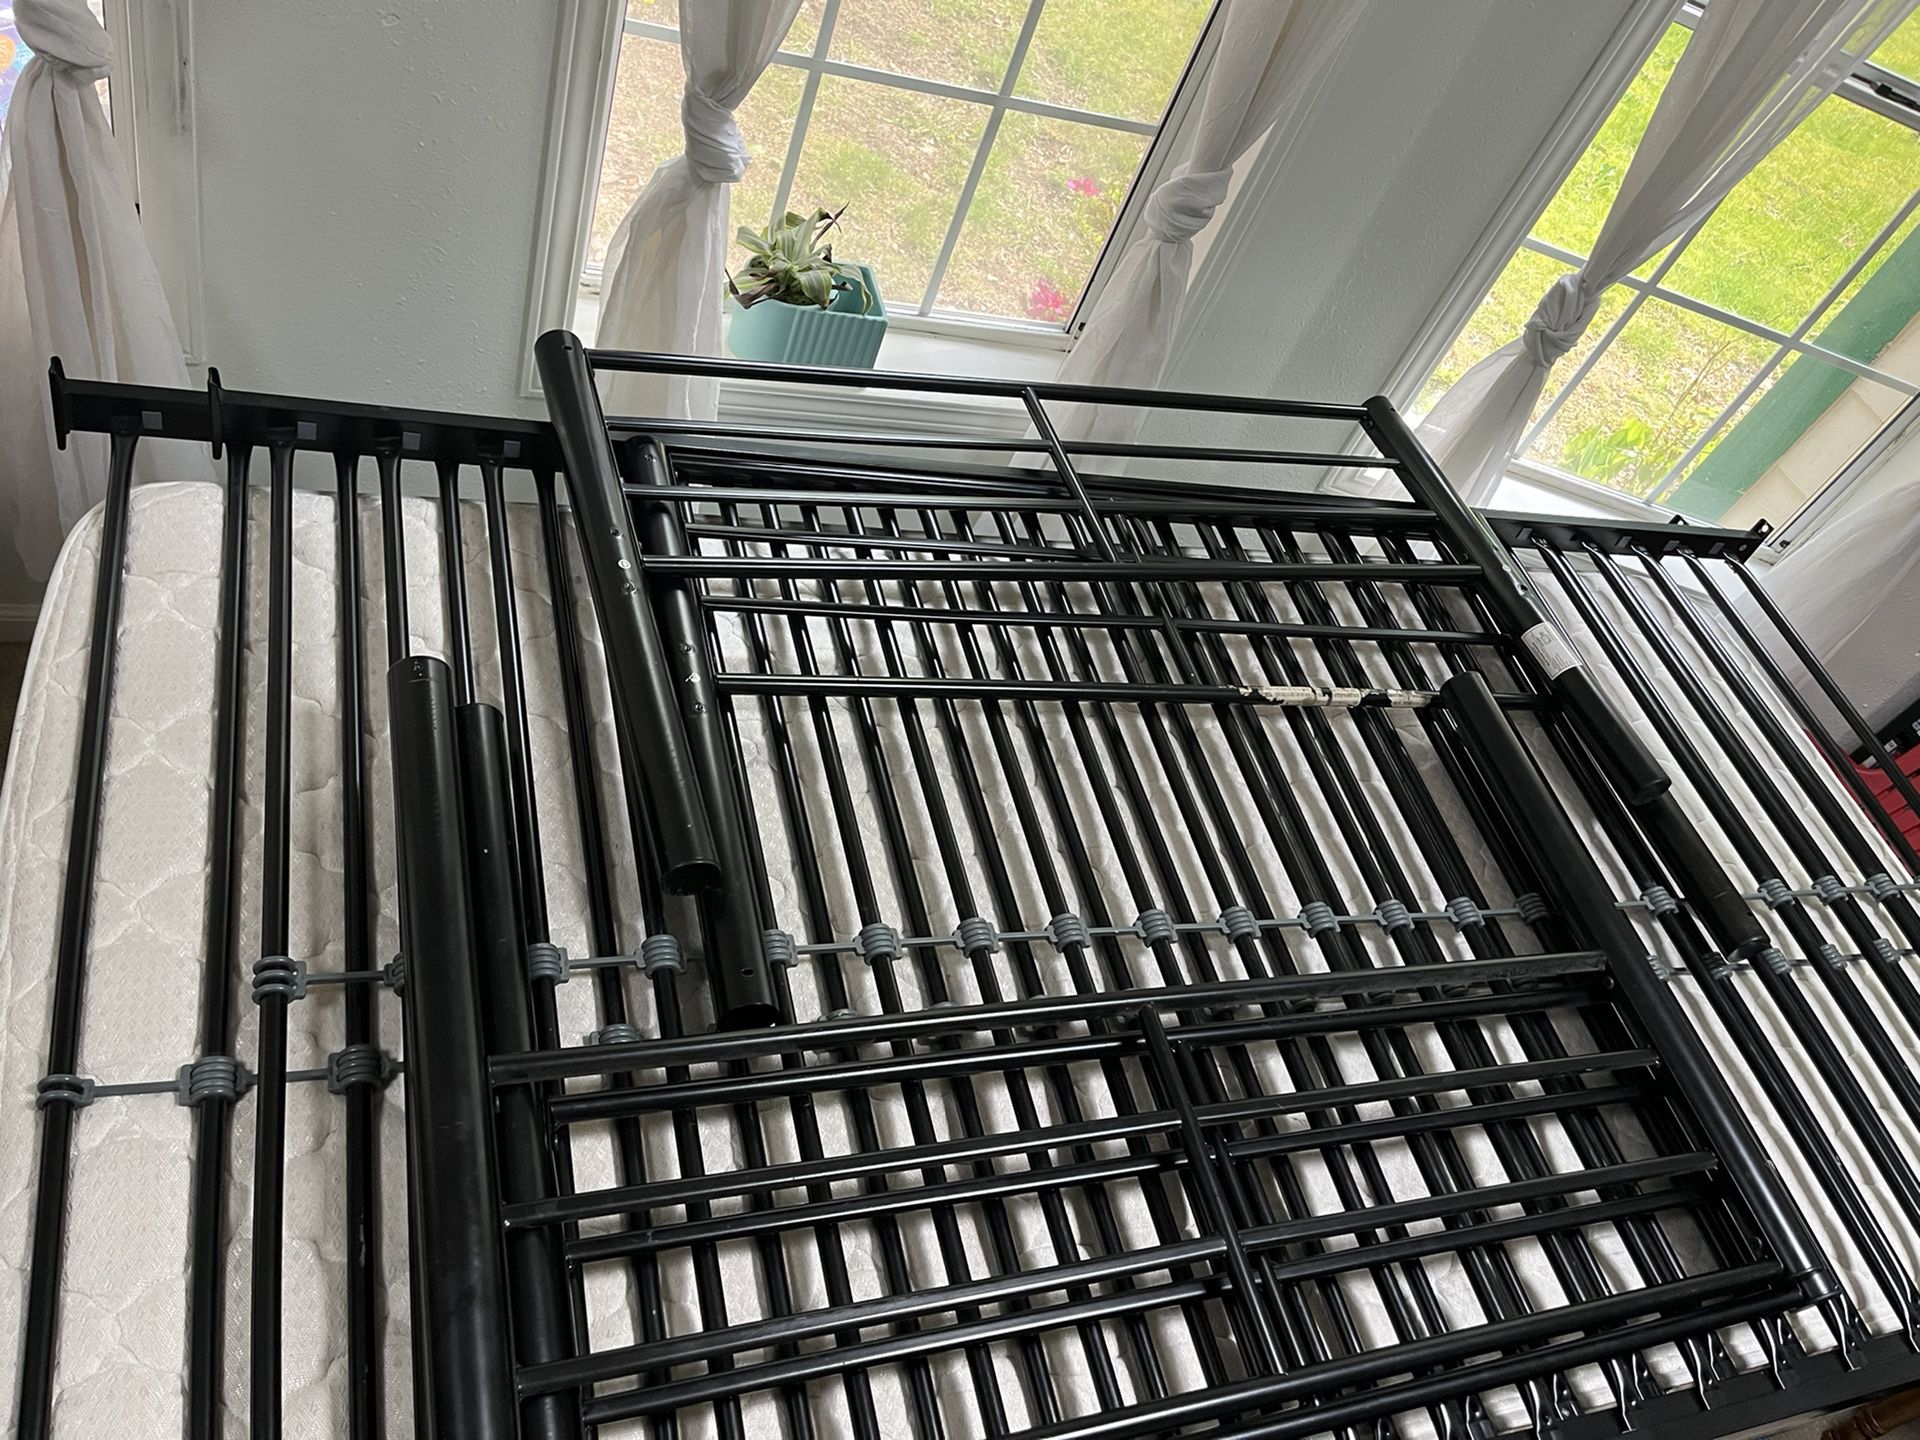 Twin bed frames free